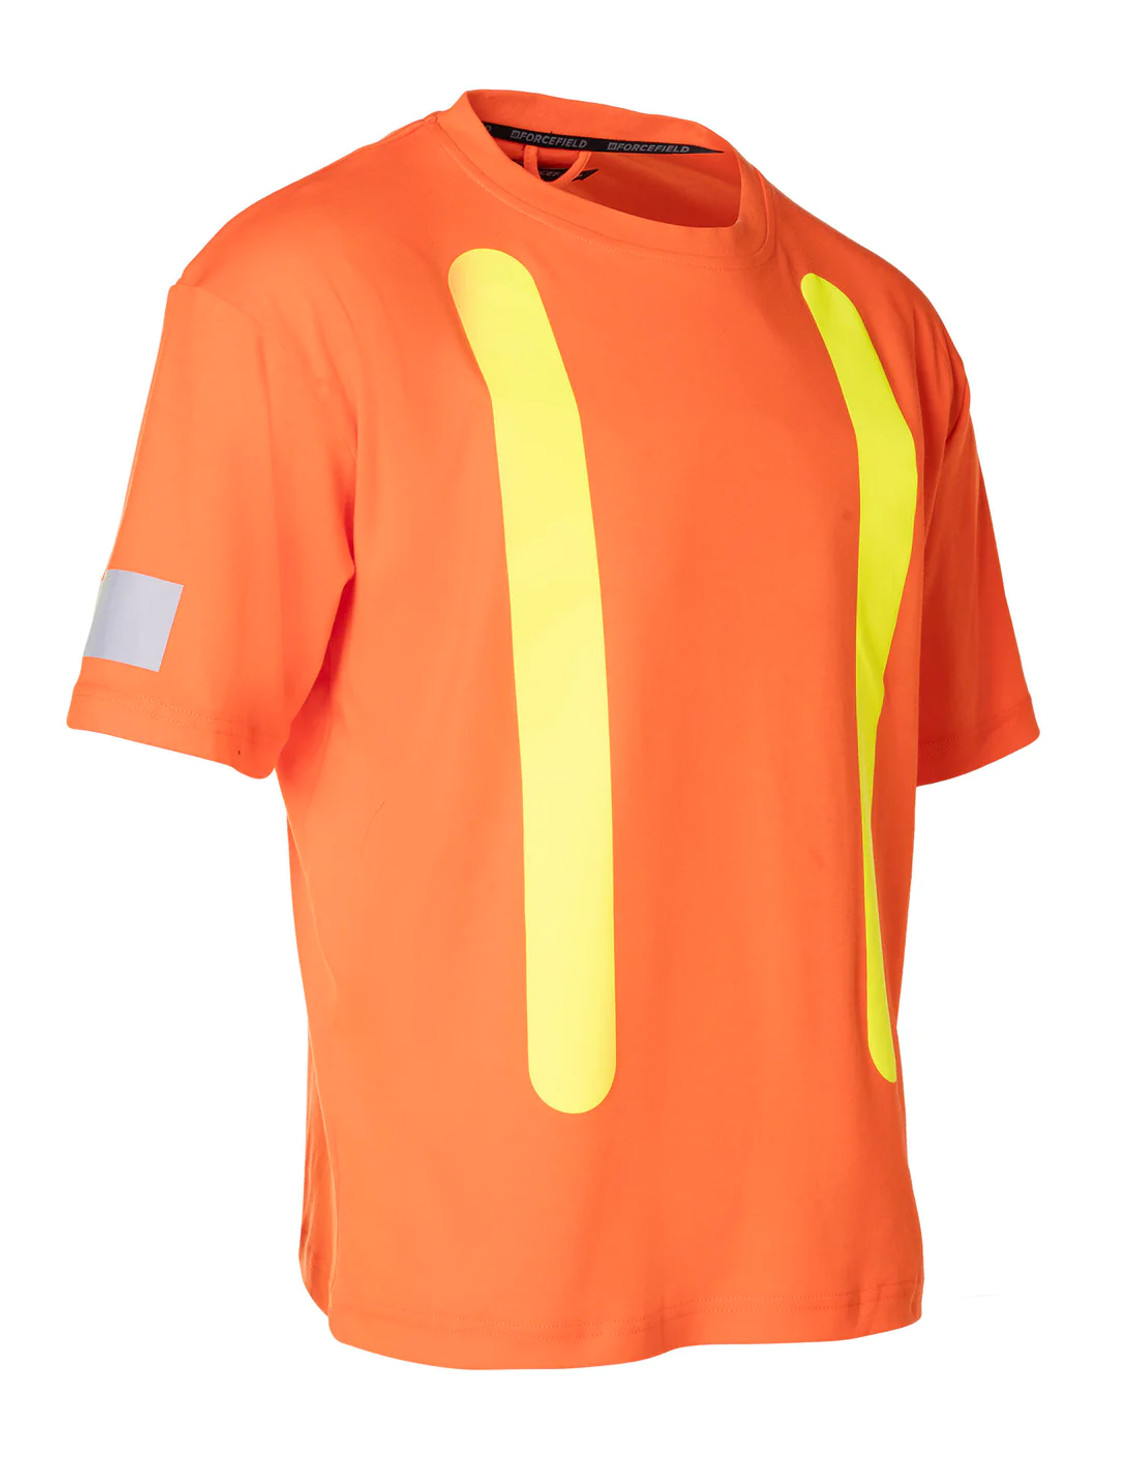 ForceField Safety Cotton Short Sleeve Tee With Reflective Arm Striping | SafetyApparel.ca